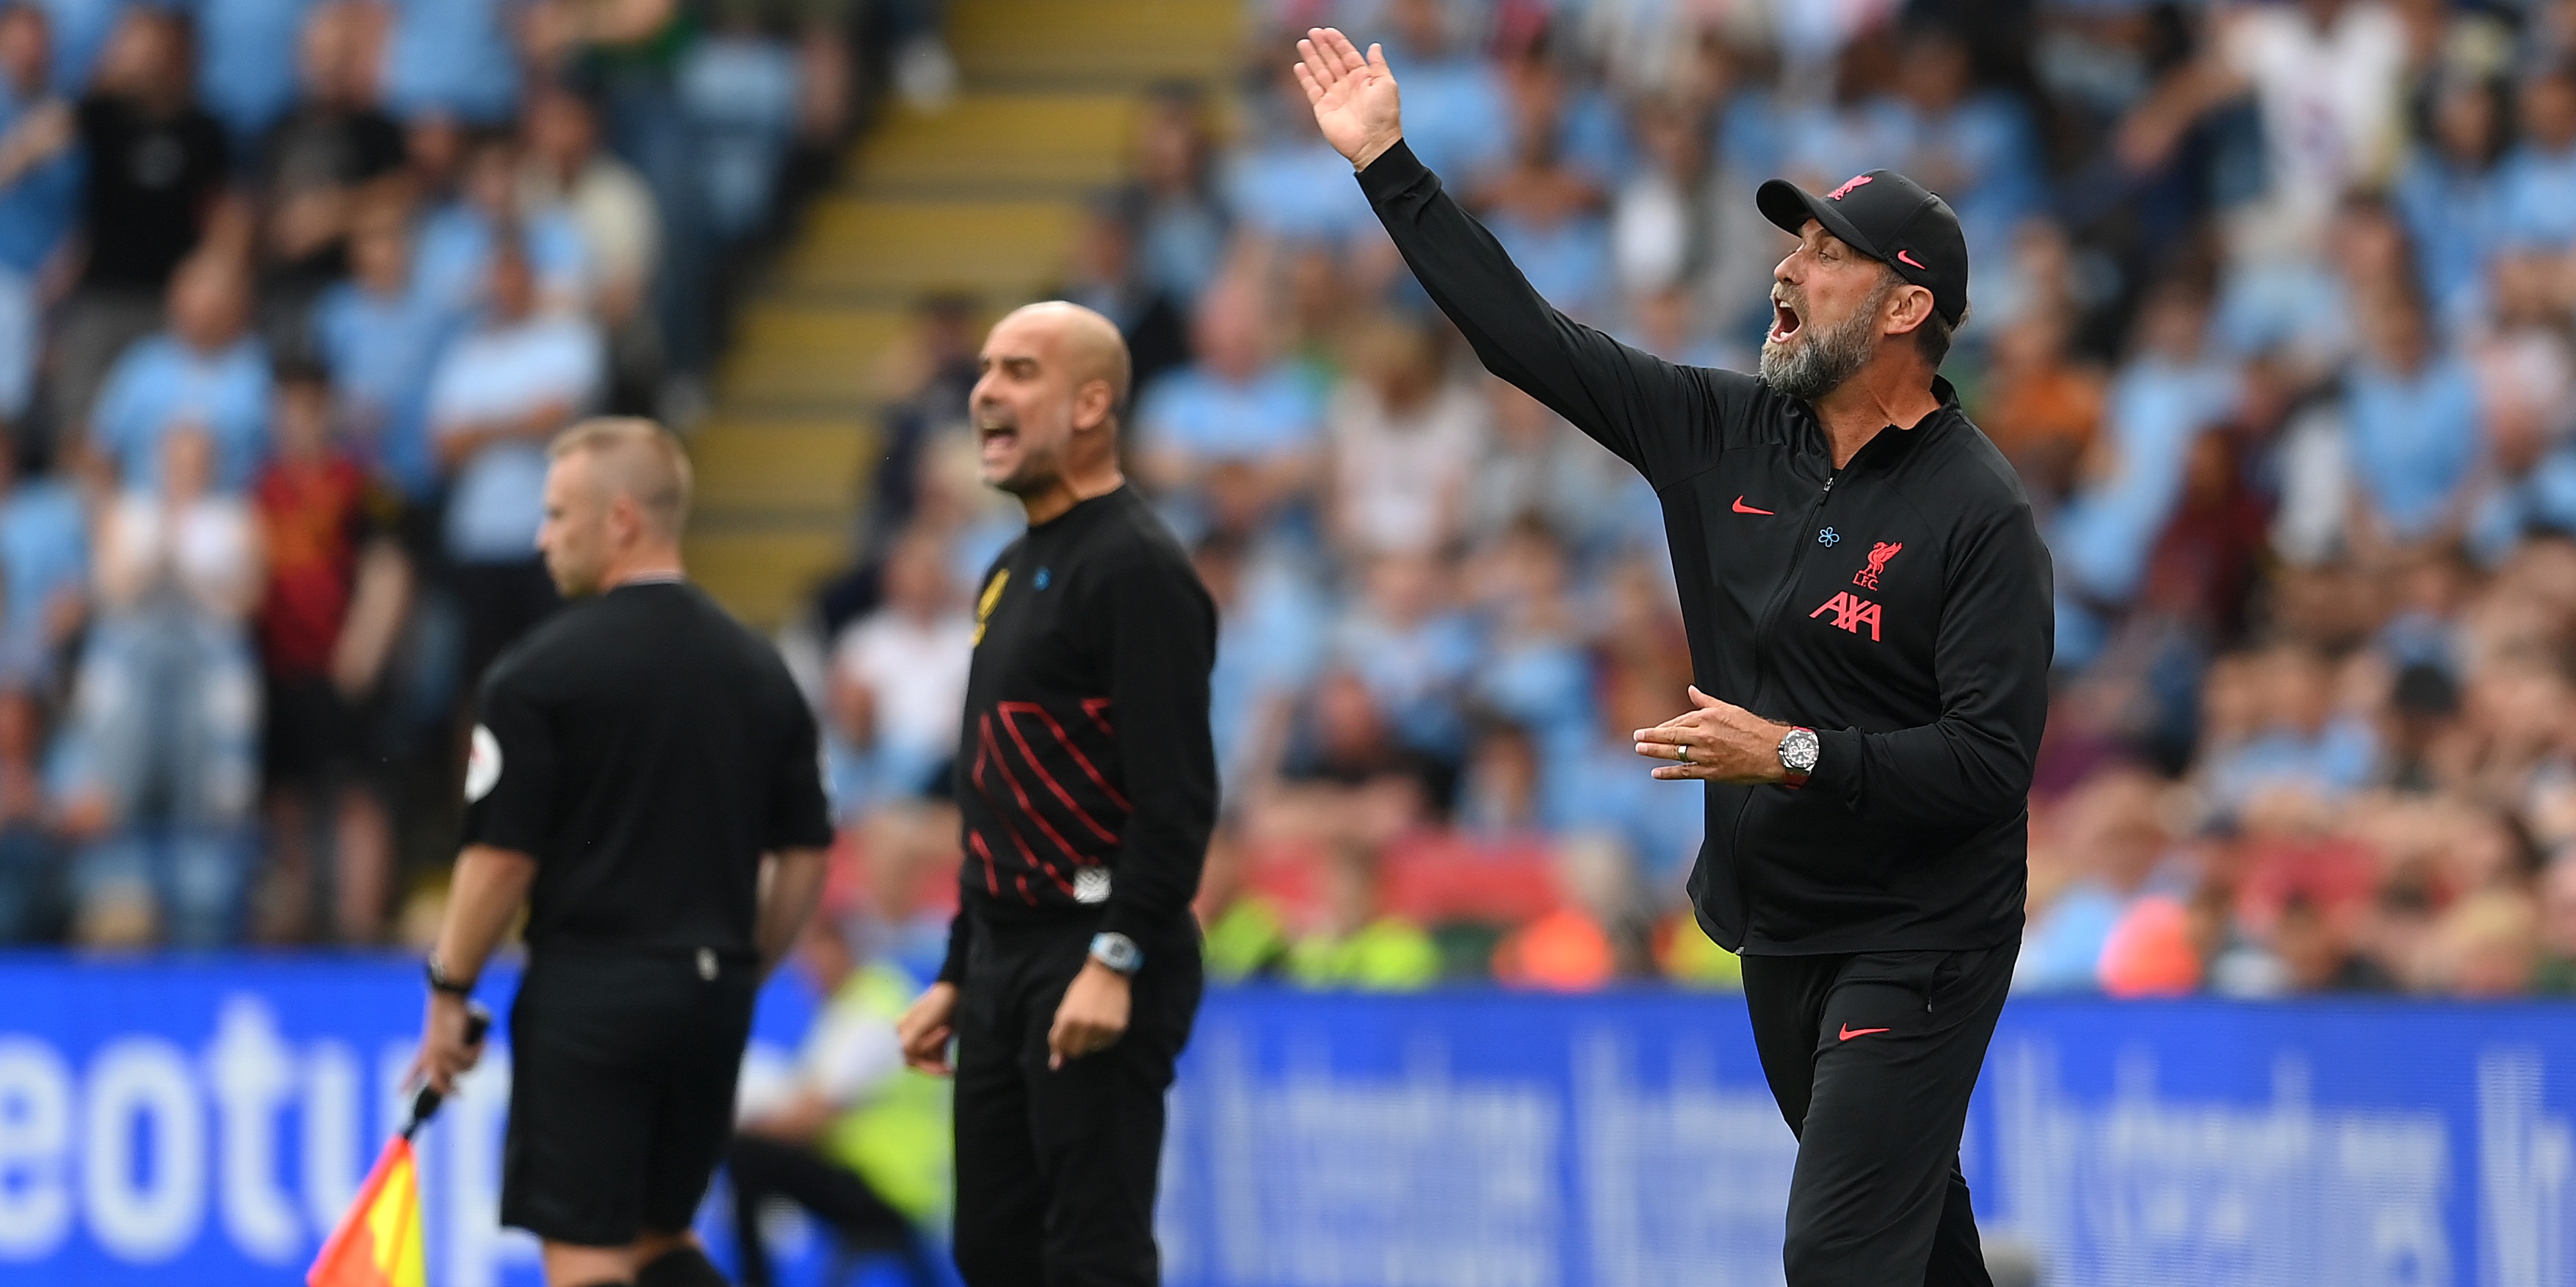 Supercomputer predicts 12-point gap between Liverpool & Man City by end of PL season